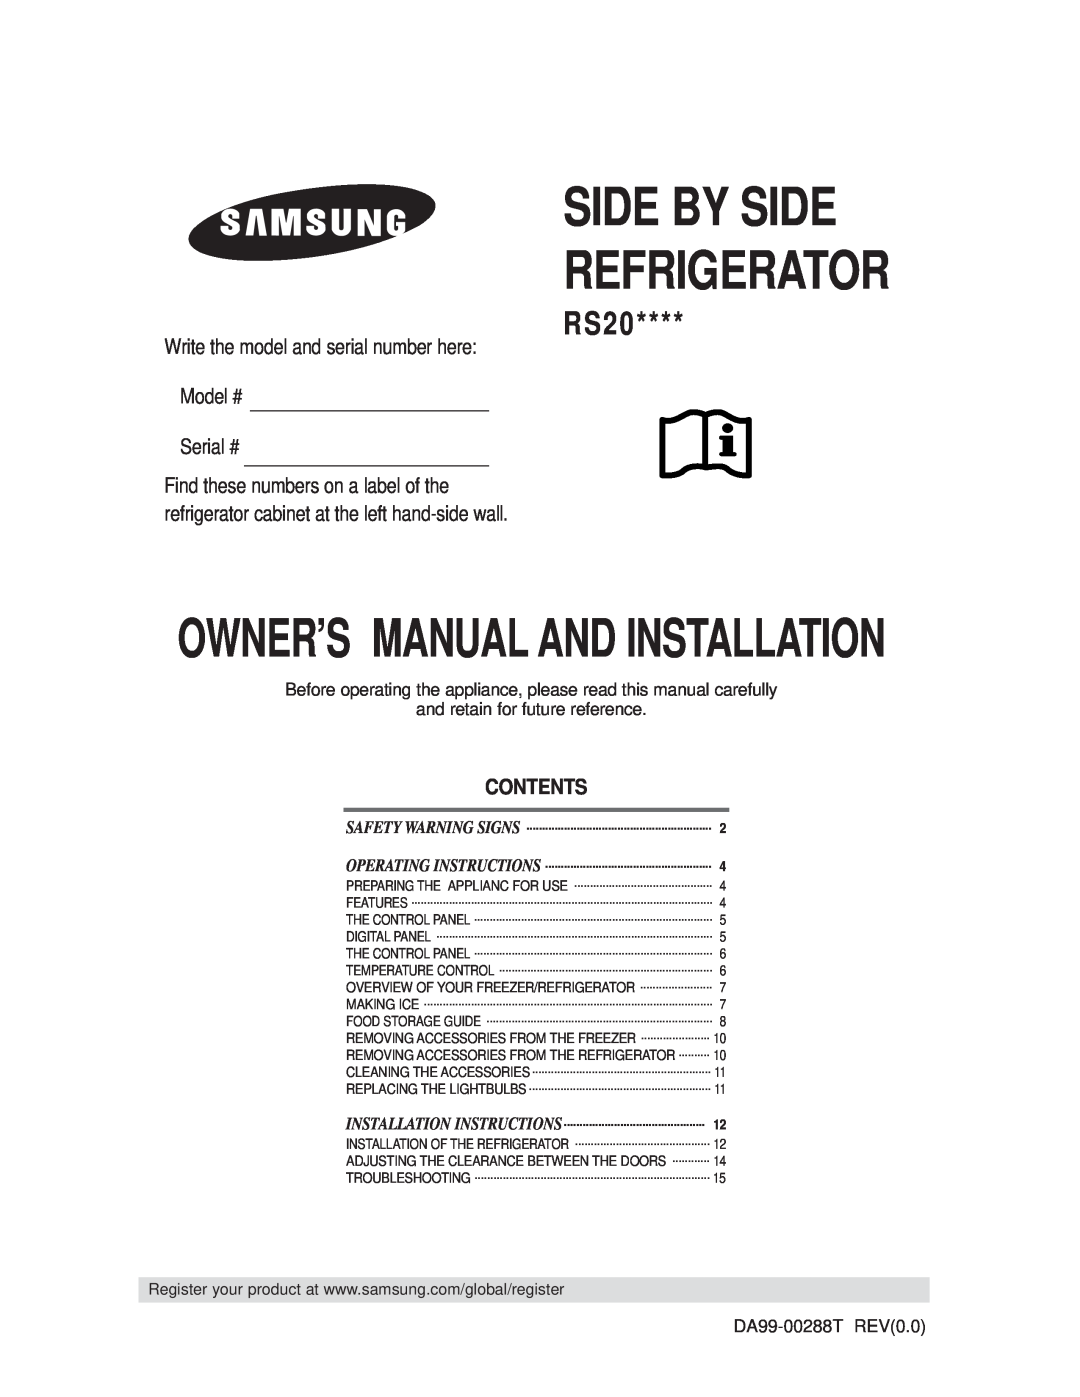 Samsung RS20**** owner manual Contents, Side By Side Refrigerator, Write the model and serial number here Model # 